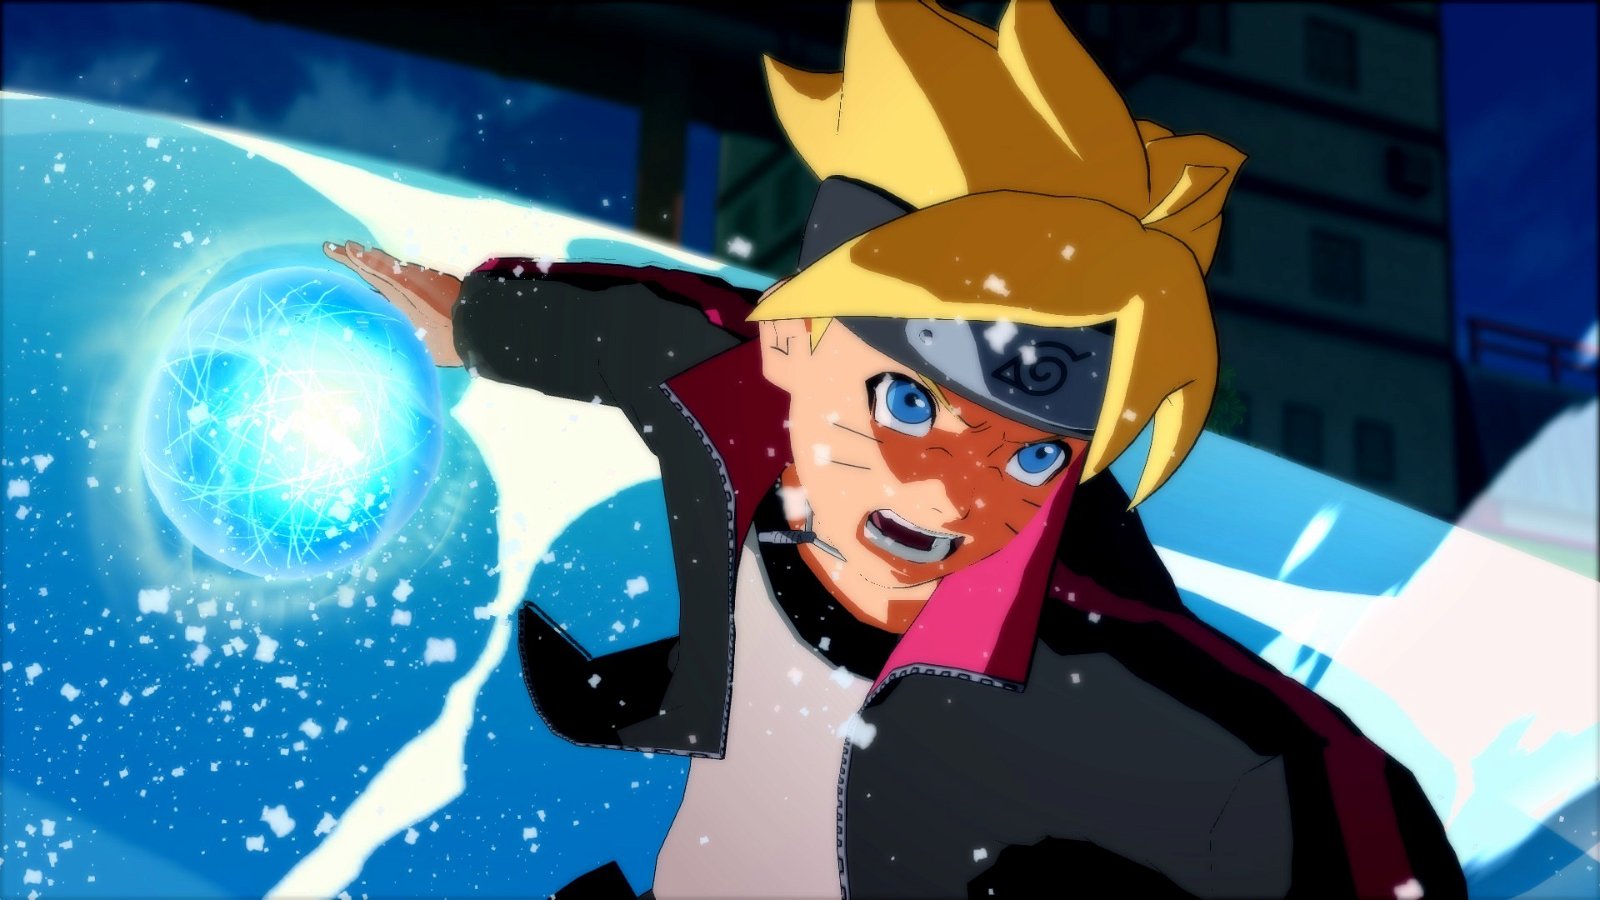 Naruto Shippuden: Ultimate Ninja Storm 4 - Road to Boruto, Naruto Shippuden Ultimate Ninja Storm 4 Road to Boruto, Naruto Shippuden, Nintendo Switch, Switch, release date, gameplay, features, price, pre-order, trailer, US, North America, Europe, Japan, Bandai Namco